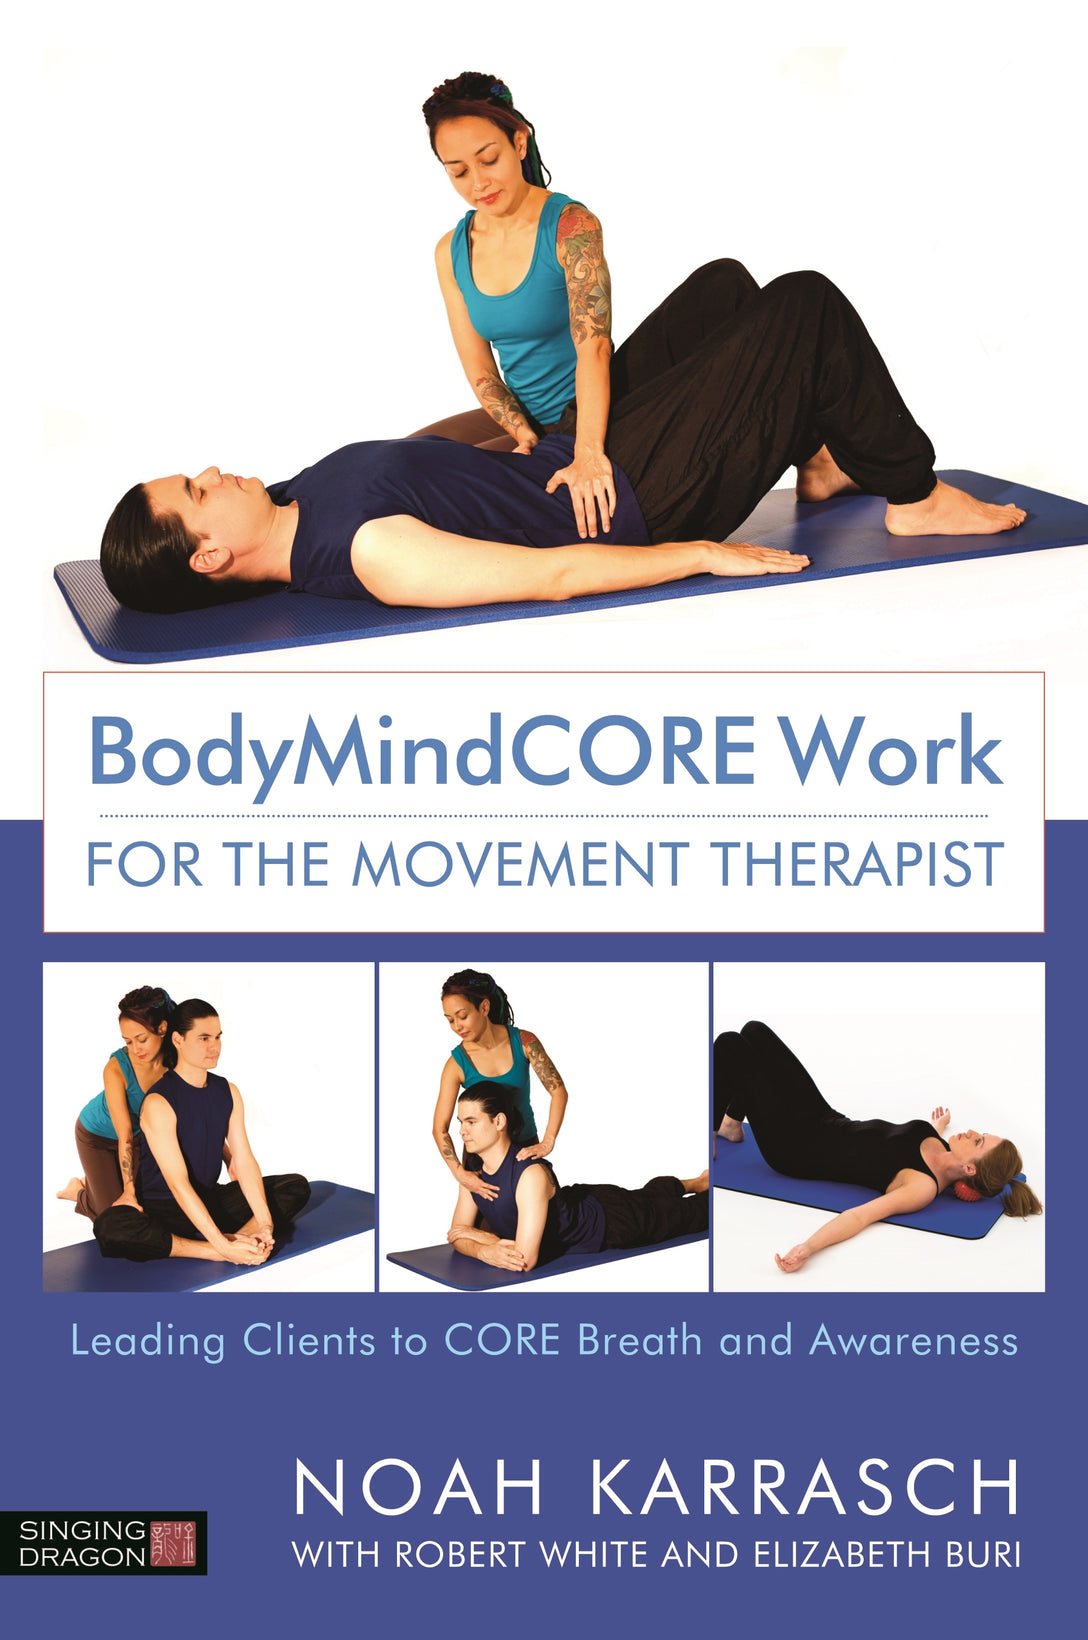 BodyMindCORE Work for the Movement Therapist by Noah Karrasch